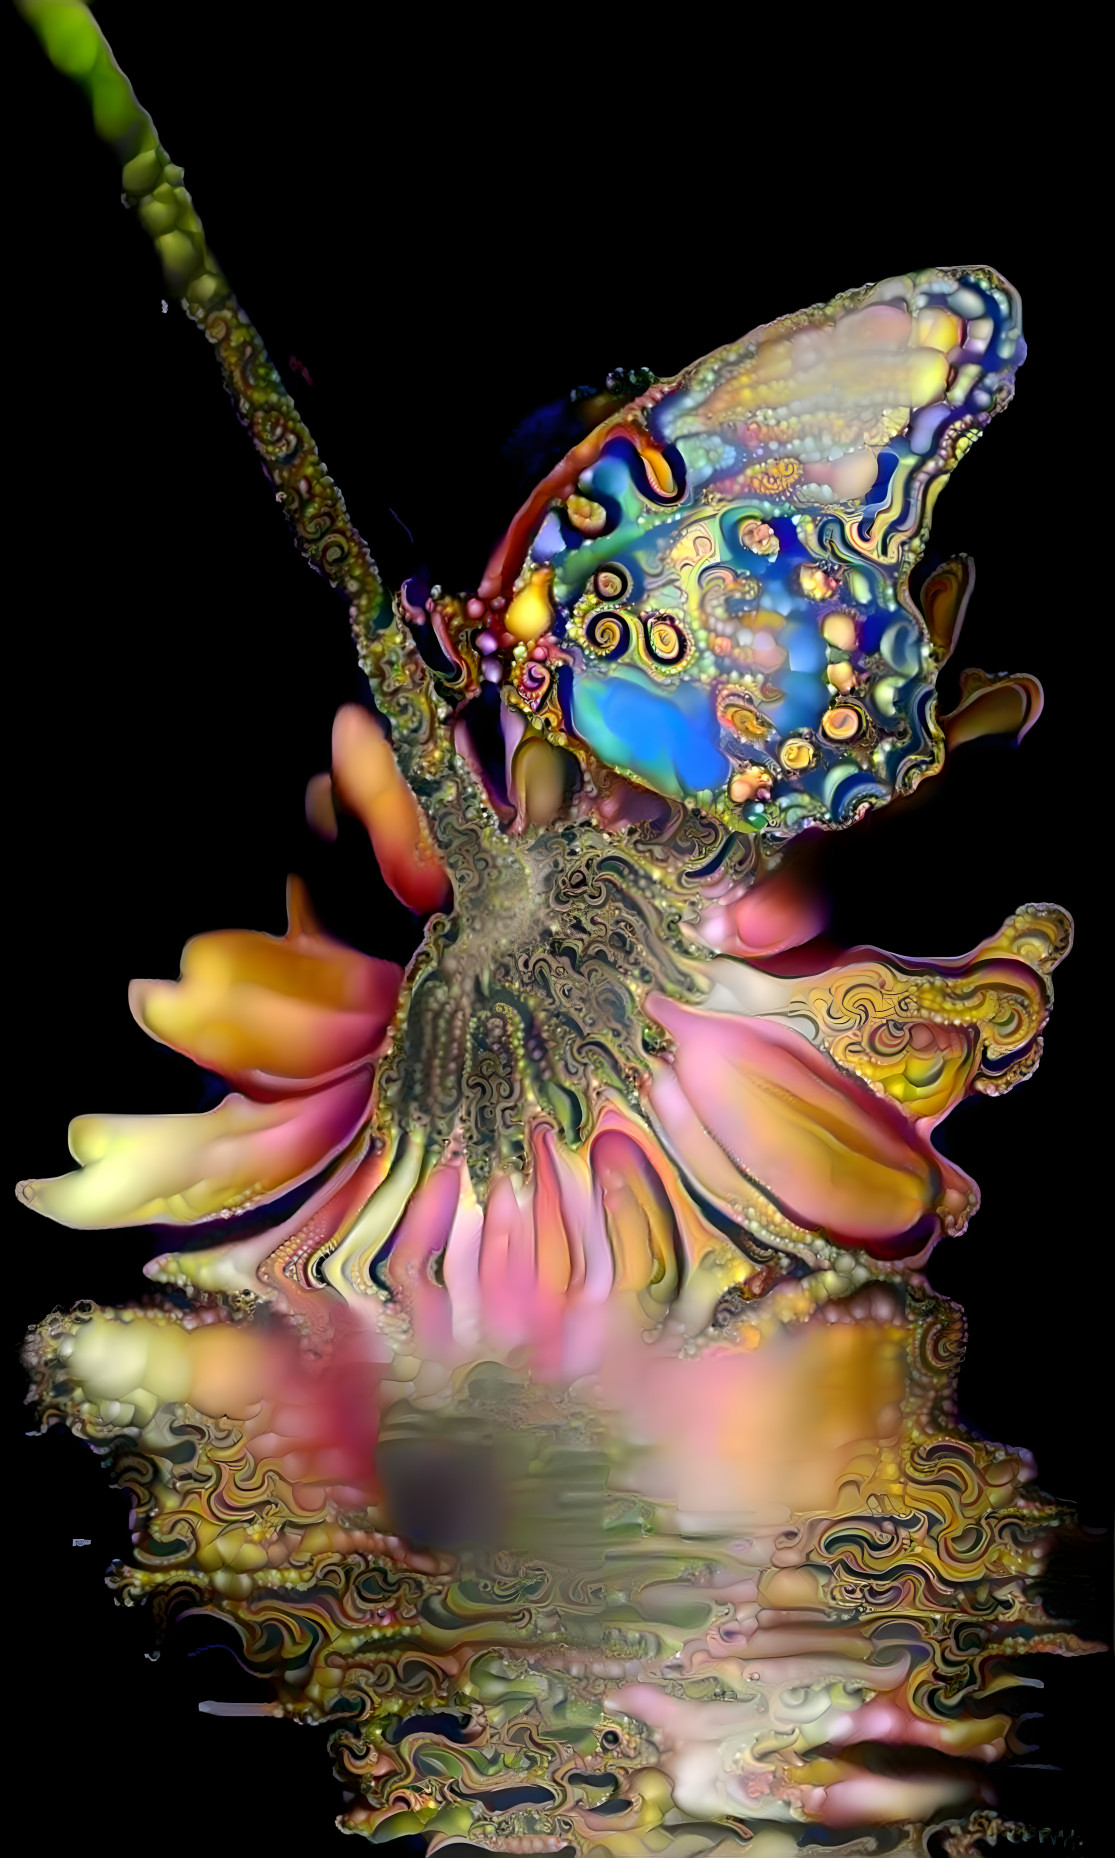 Water Reflection Of Flower And Butterfly